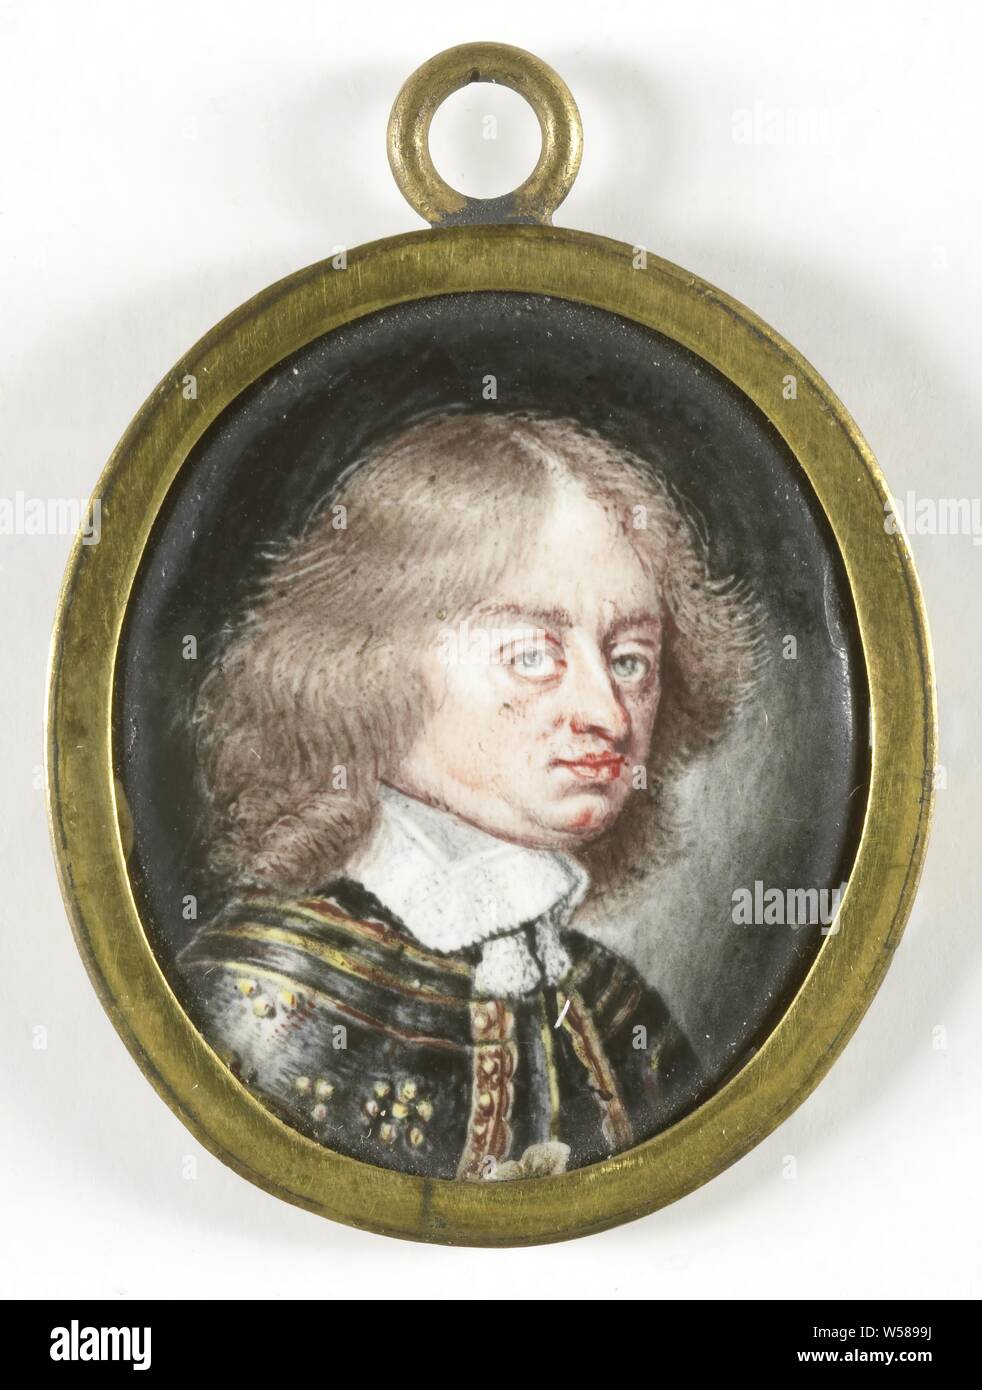 Portrait of a man, perhaps Louis II of Bourbon (1621-86), Prince of Condé, Prince of Condé Bust, to the right, facing front, in armor. Part of the collection of portrait miniatures, Louis II de Bourbon (Prince of Conde), anonymous, France, 1640 - 1660, gold (metal), h 2.6 cm × w 2.2 cm h 3.3 cm × w 2.4 cm × d 0.3 cm Stock Photo